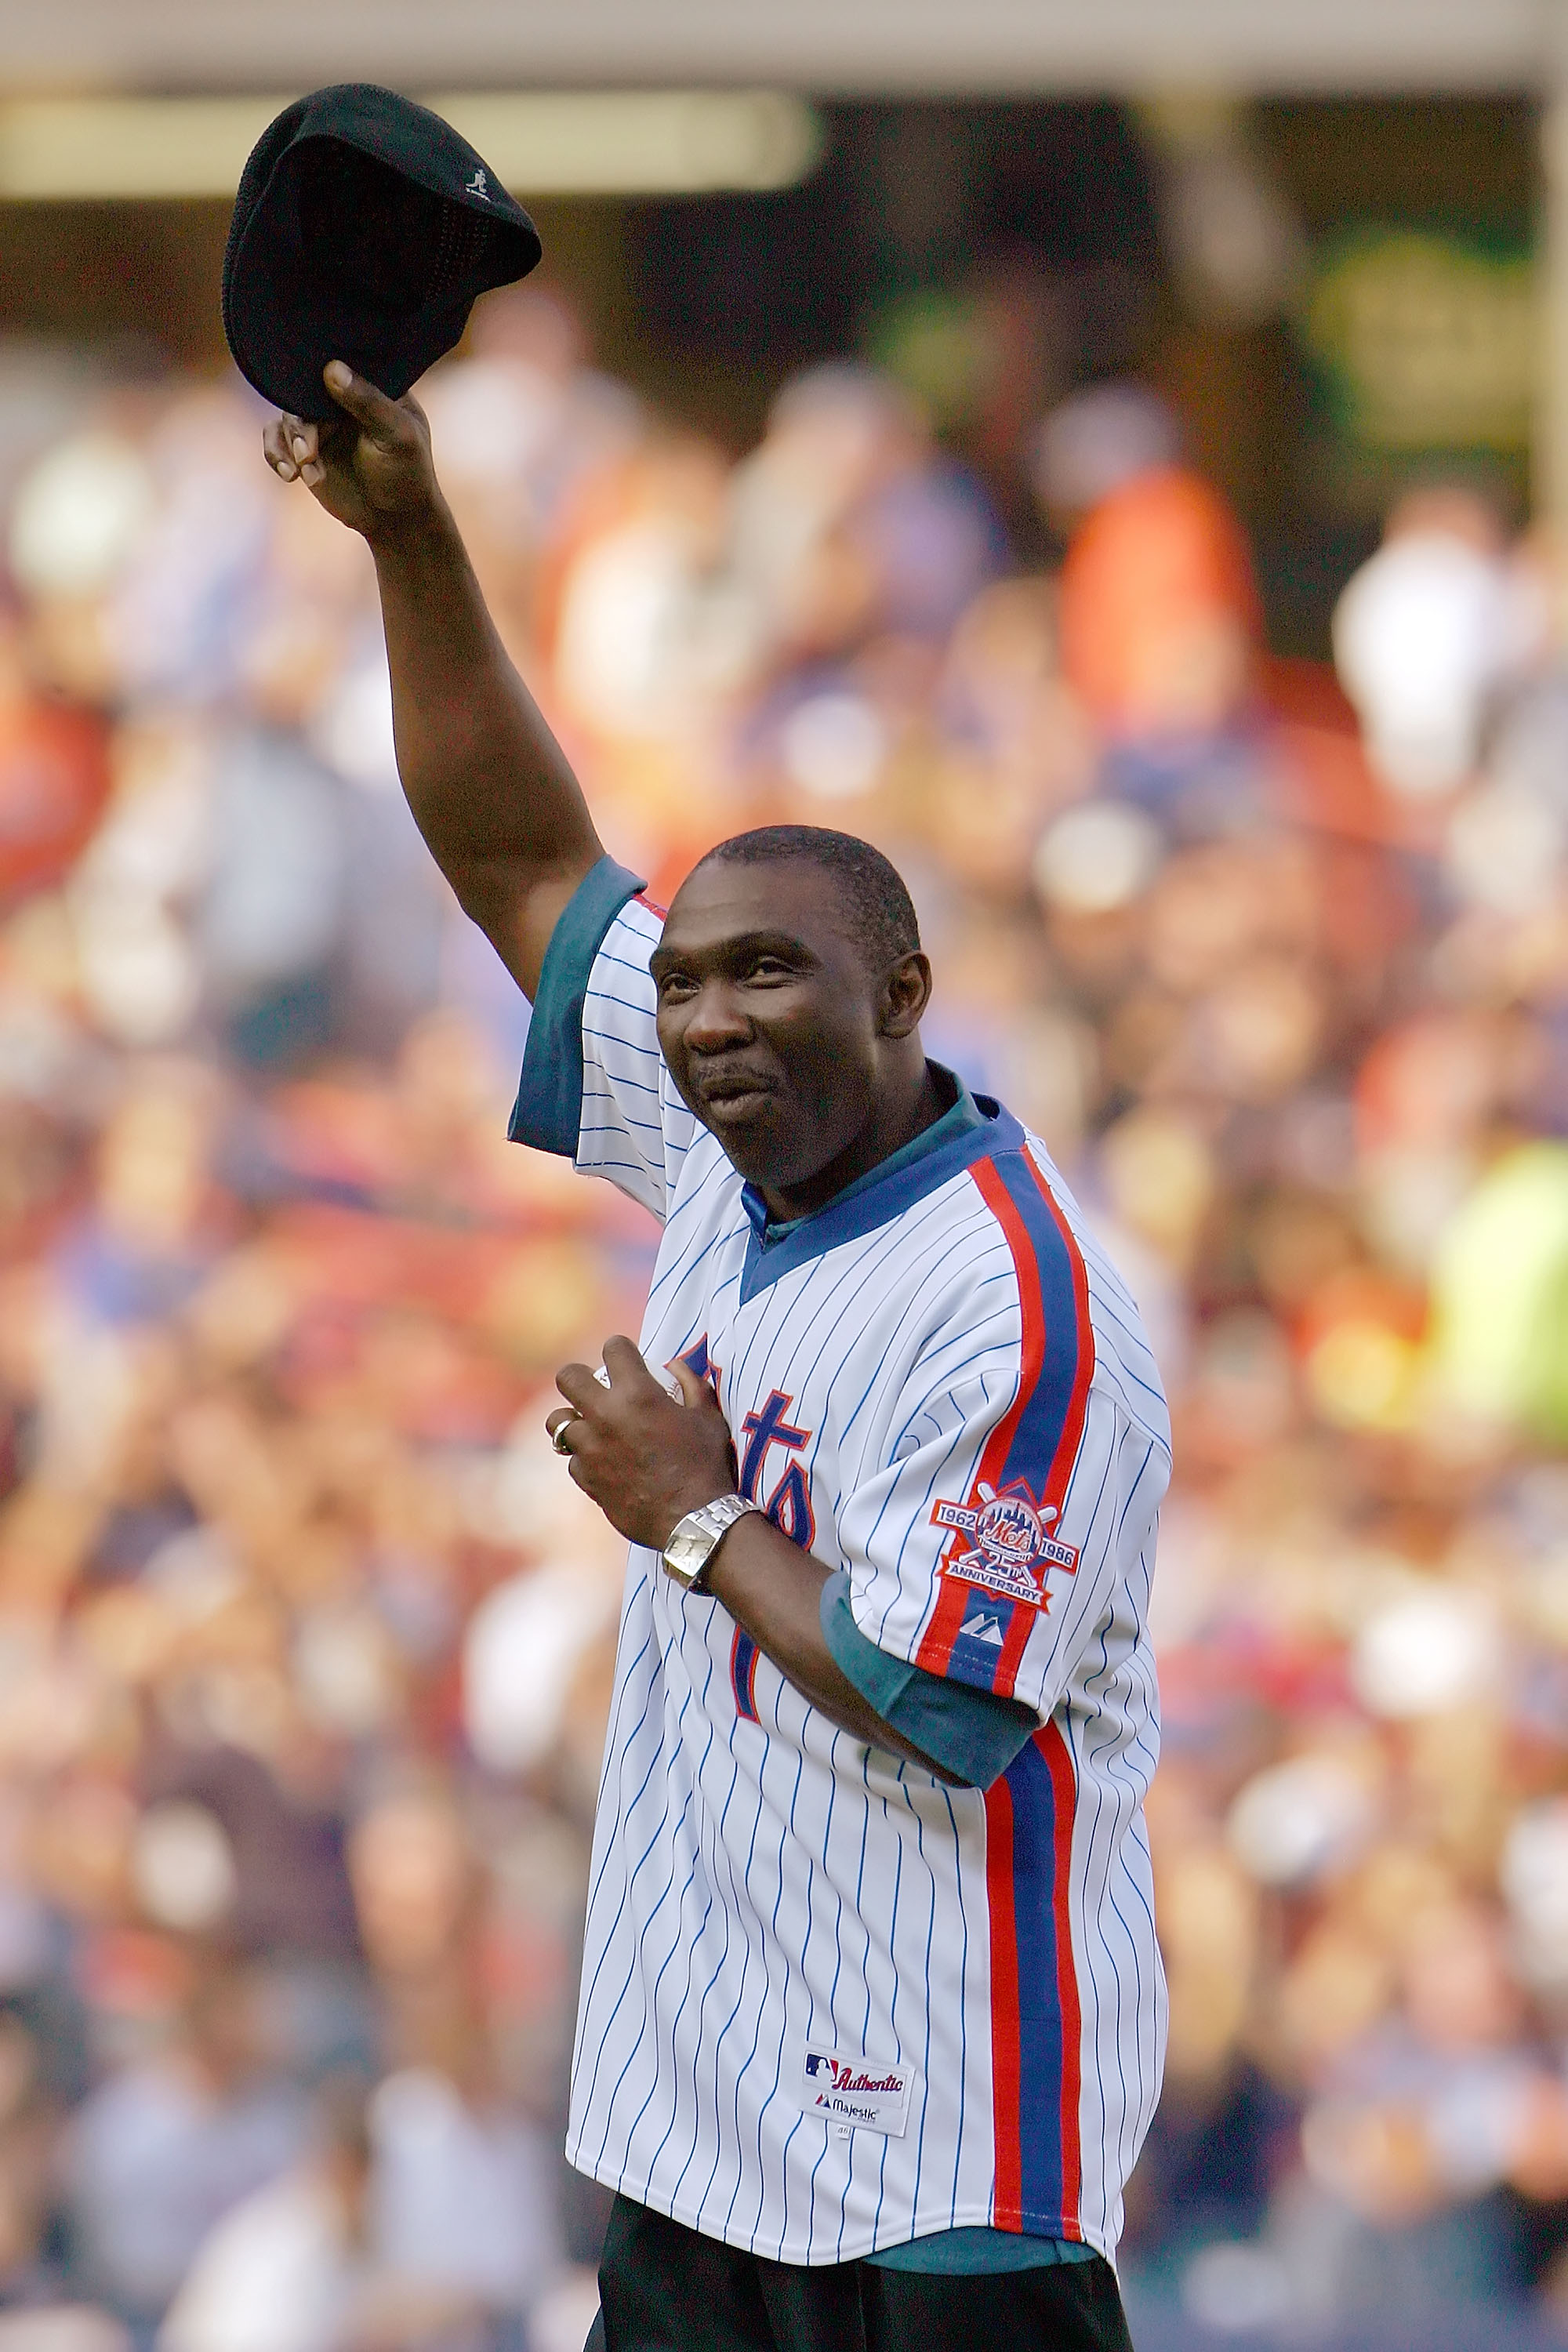 NEW YORK - OCTOBER 04:  Mookie Wilson formerly of the New York Mets waves to the fans before throwing out the first pitch for a game against the Los Angeles Dodgers in game one of the National League Division Series at Shea Stadium on October 4, 2006 in t